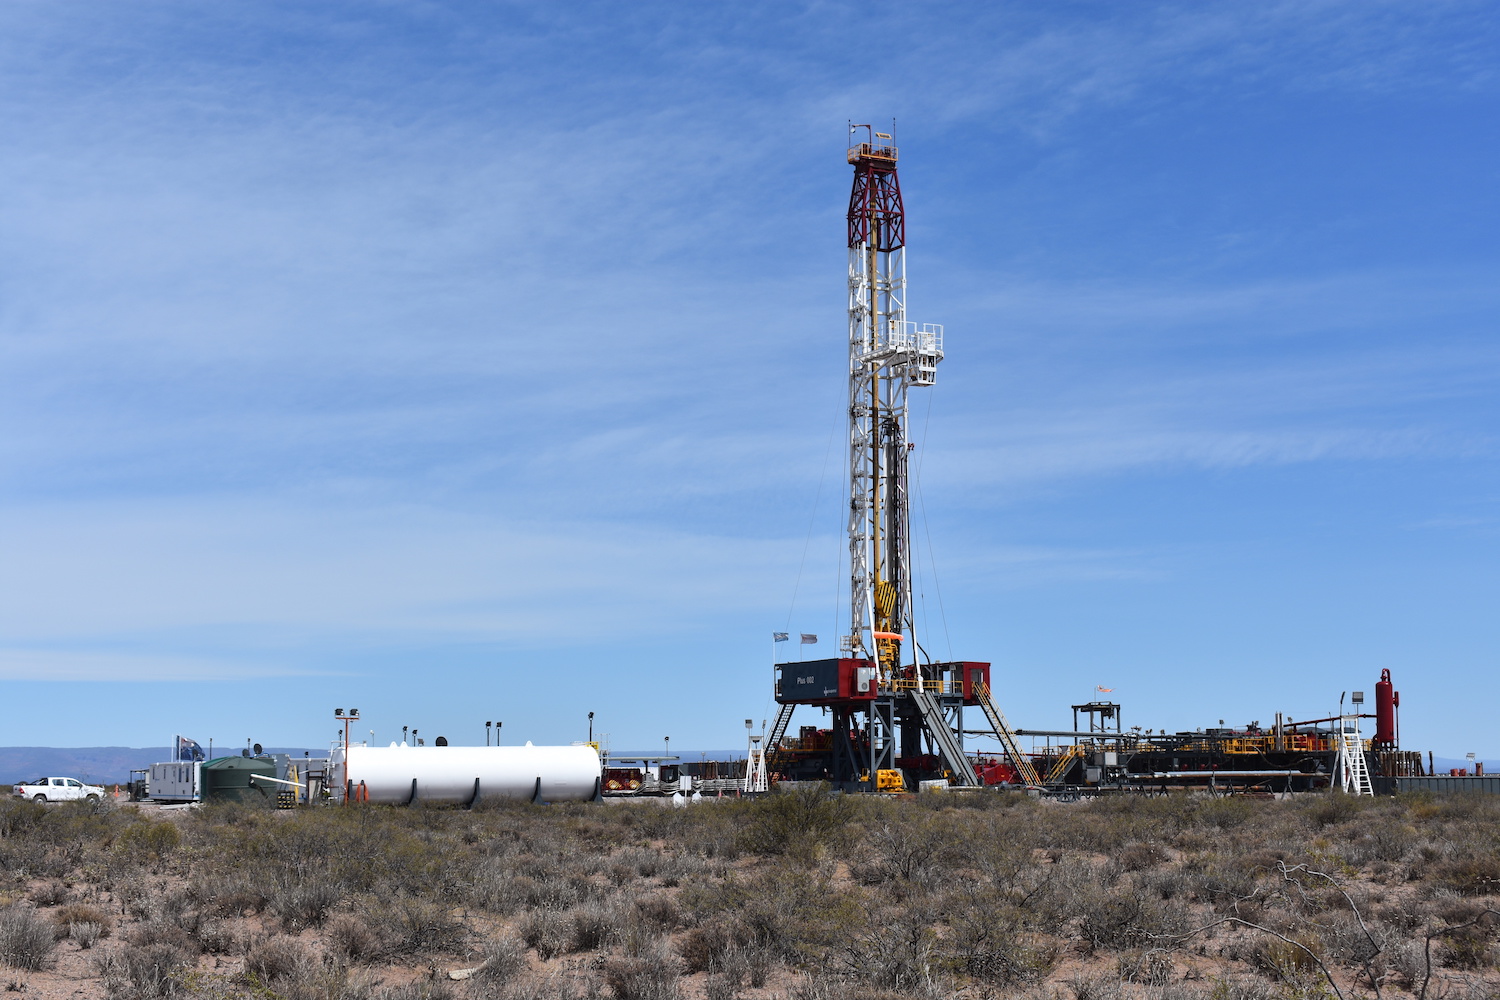 Developing the Vaca Muerta shale's oil and gas reserves is in early stages, with roughly 800 wells drilled so far.